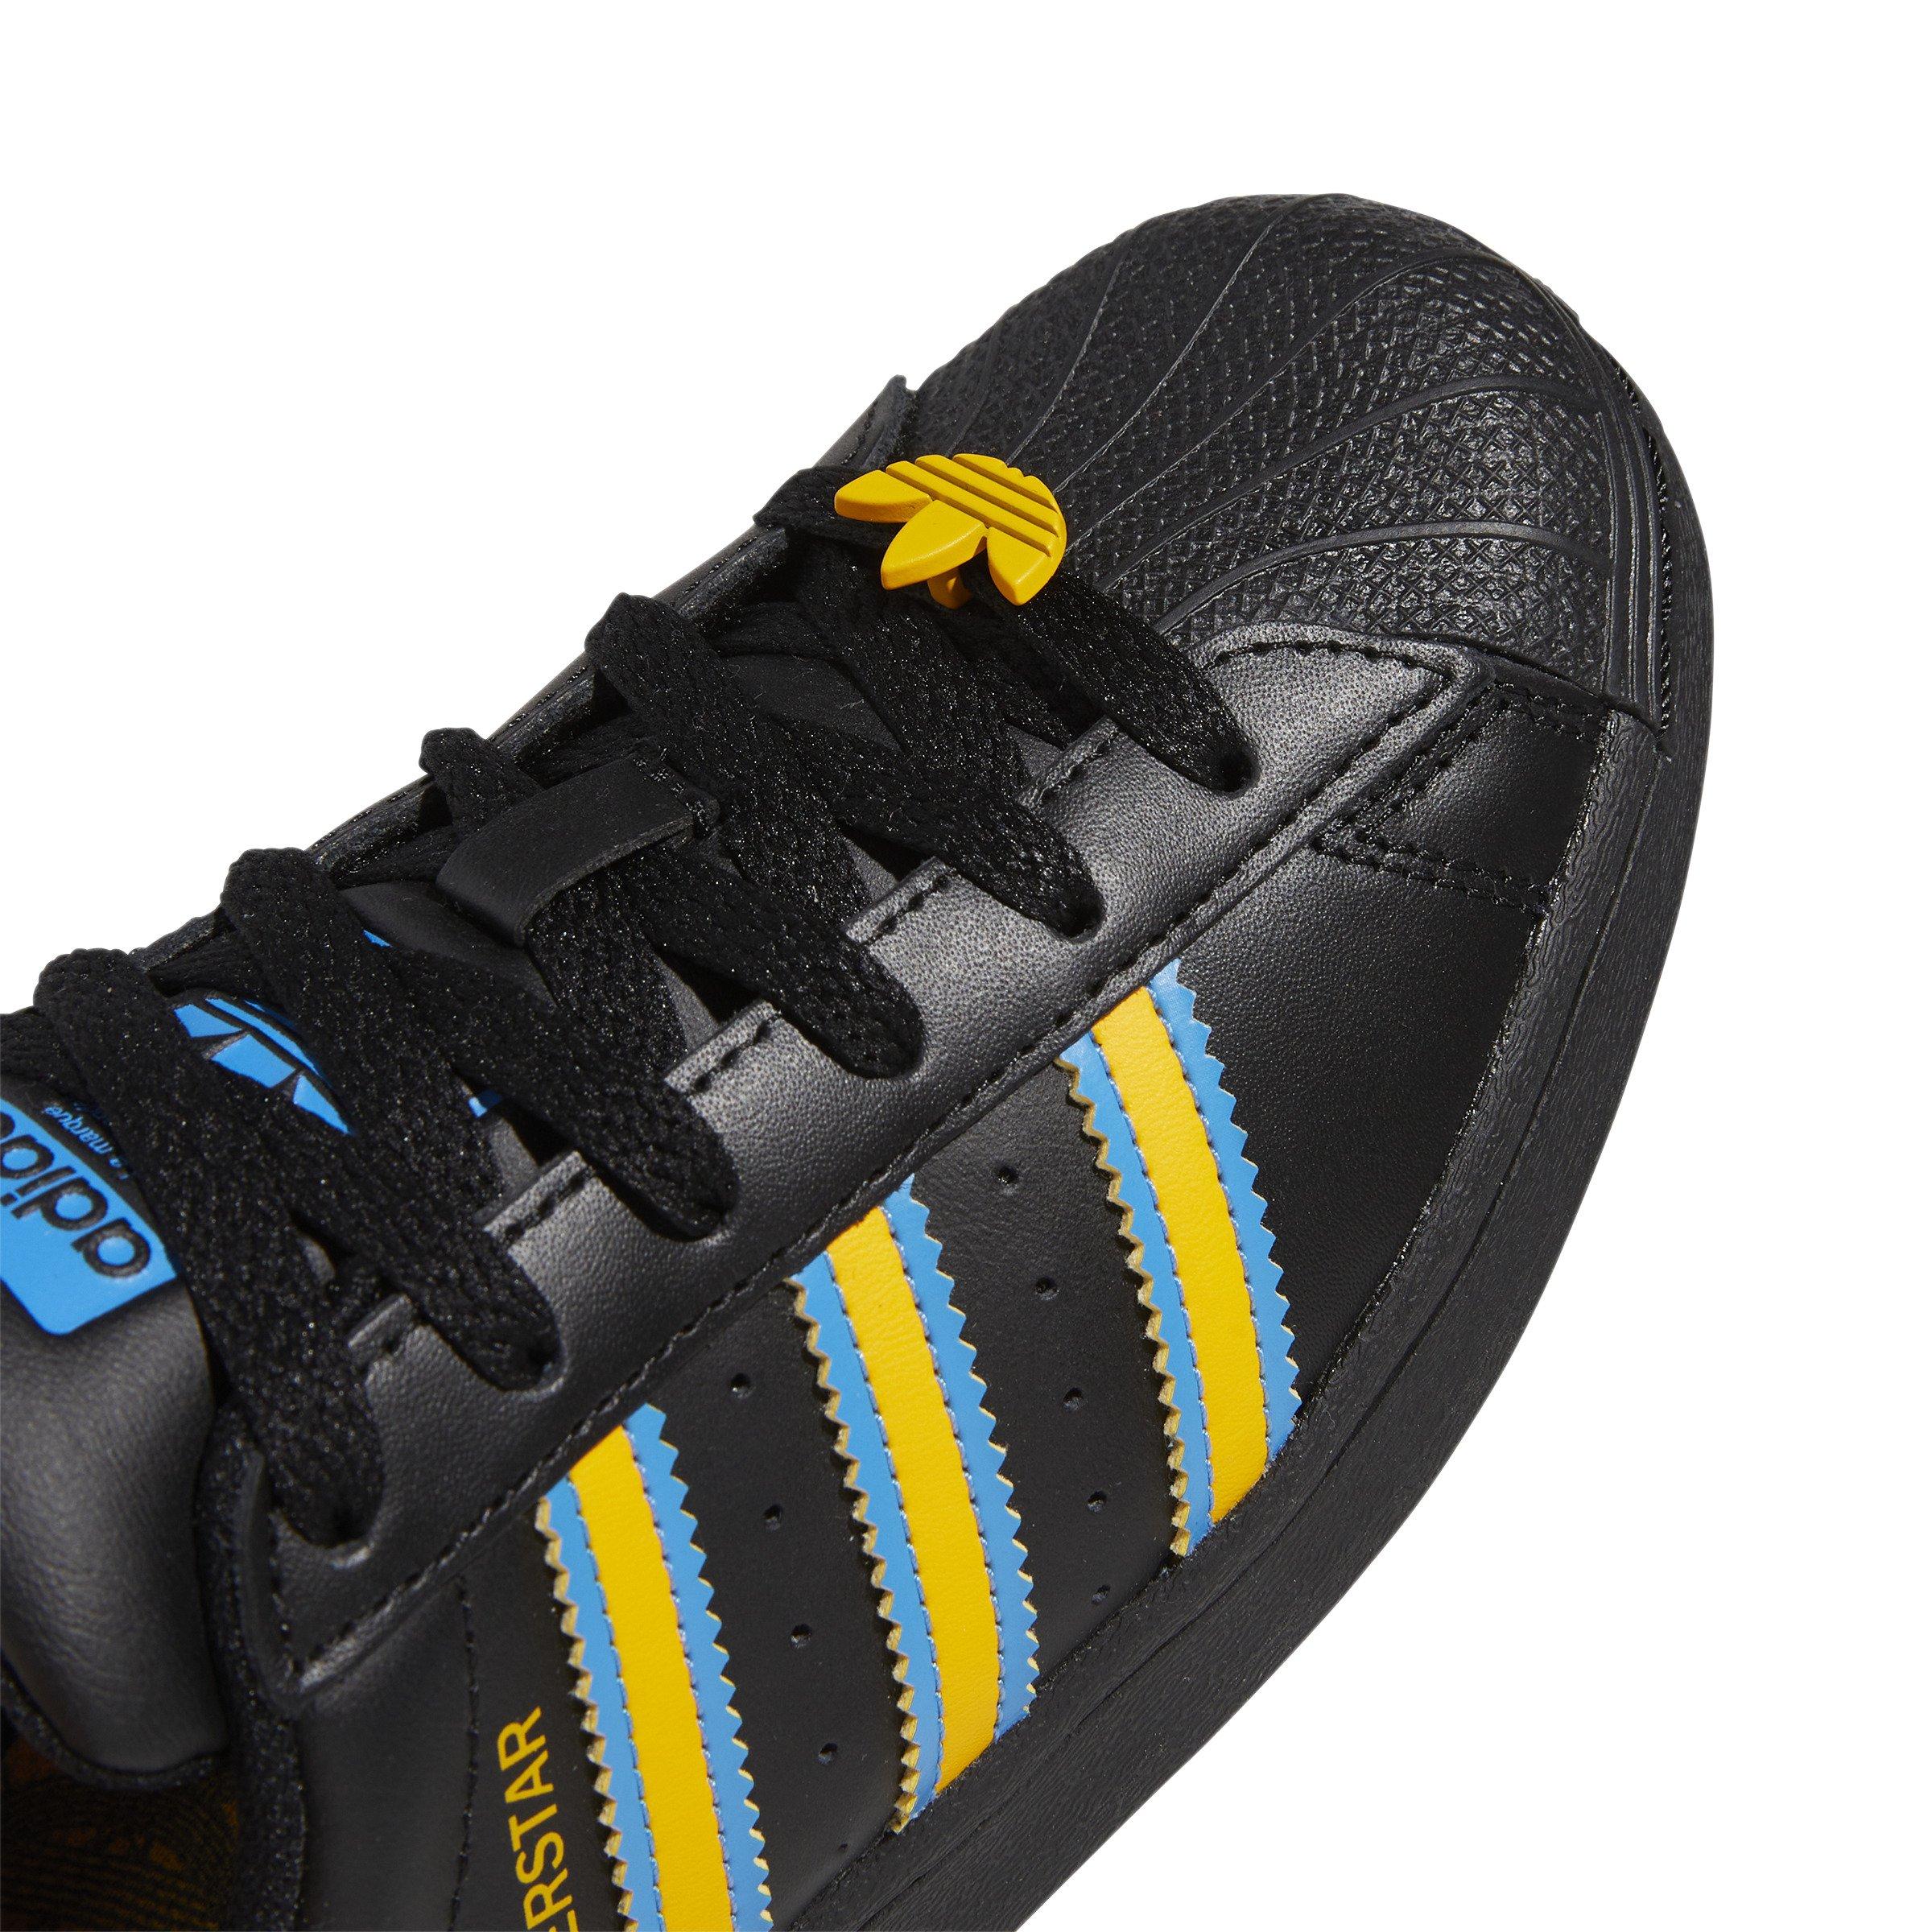 Adidas Superstar 'Black Gold Blue' Mens Size 10 (New Without Box)